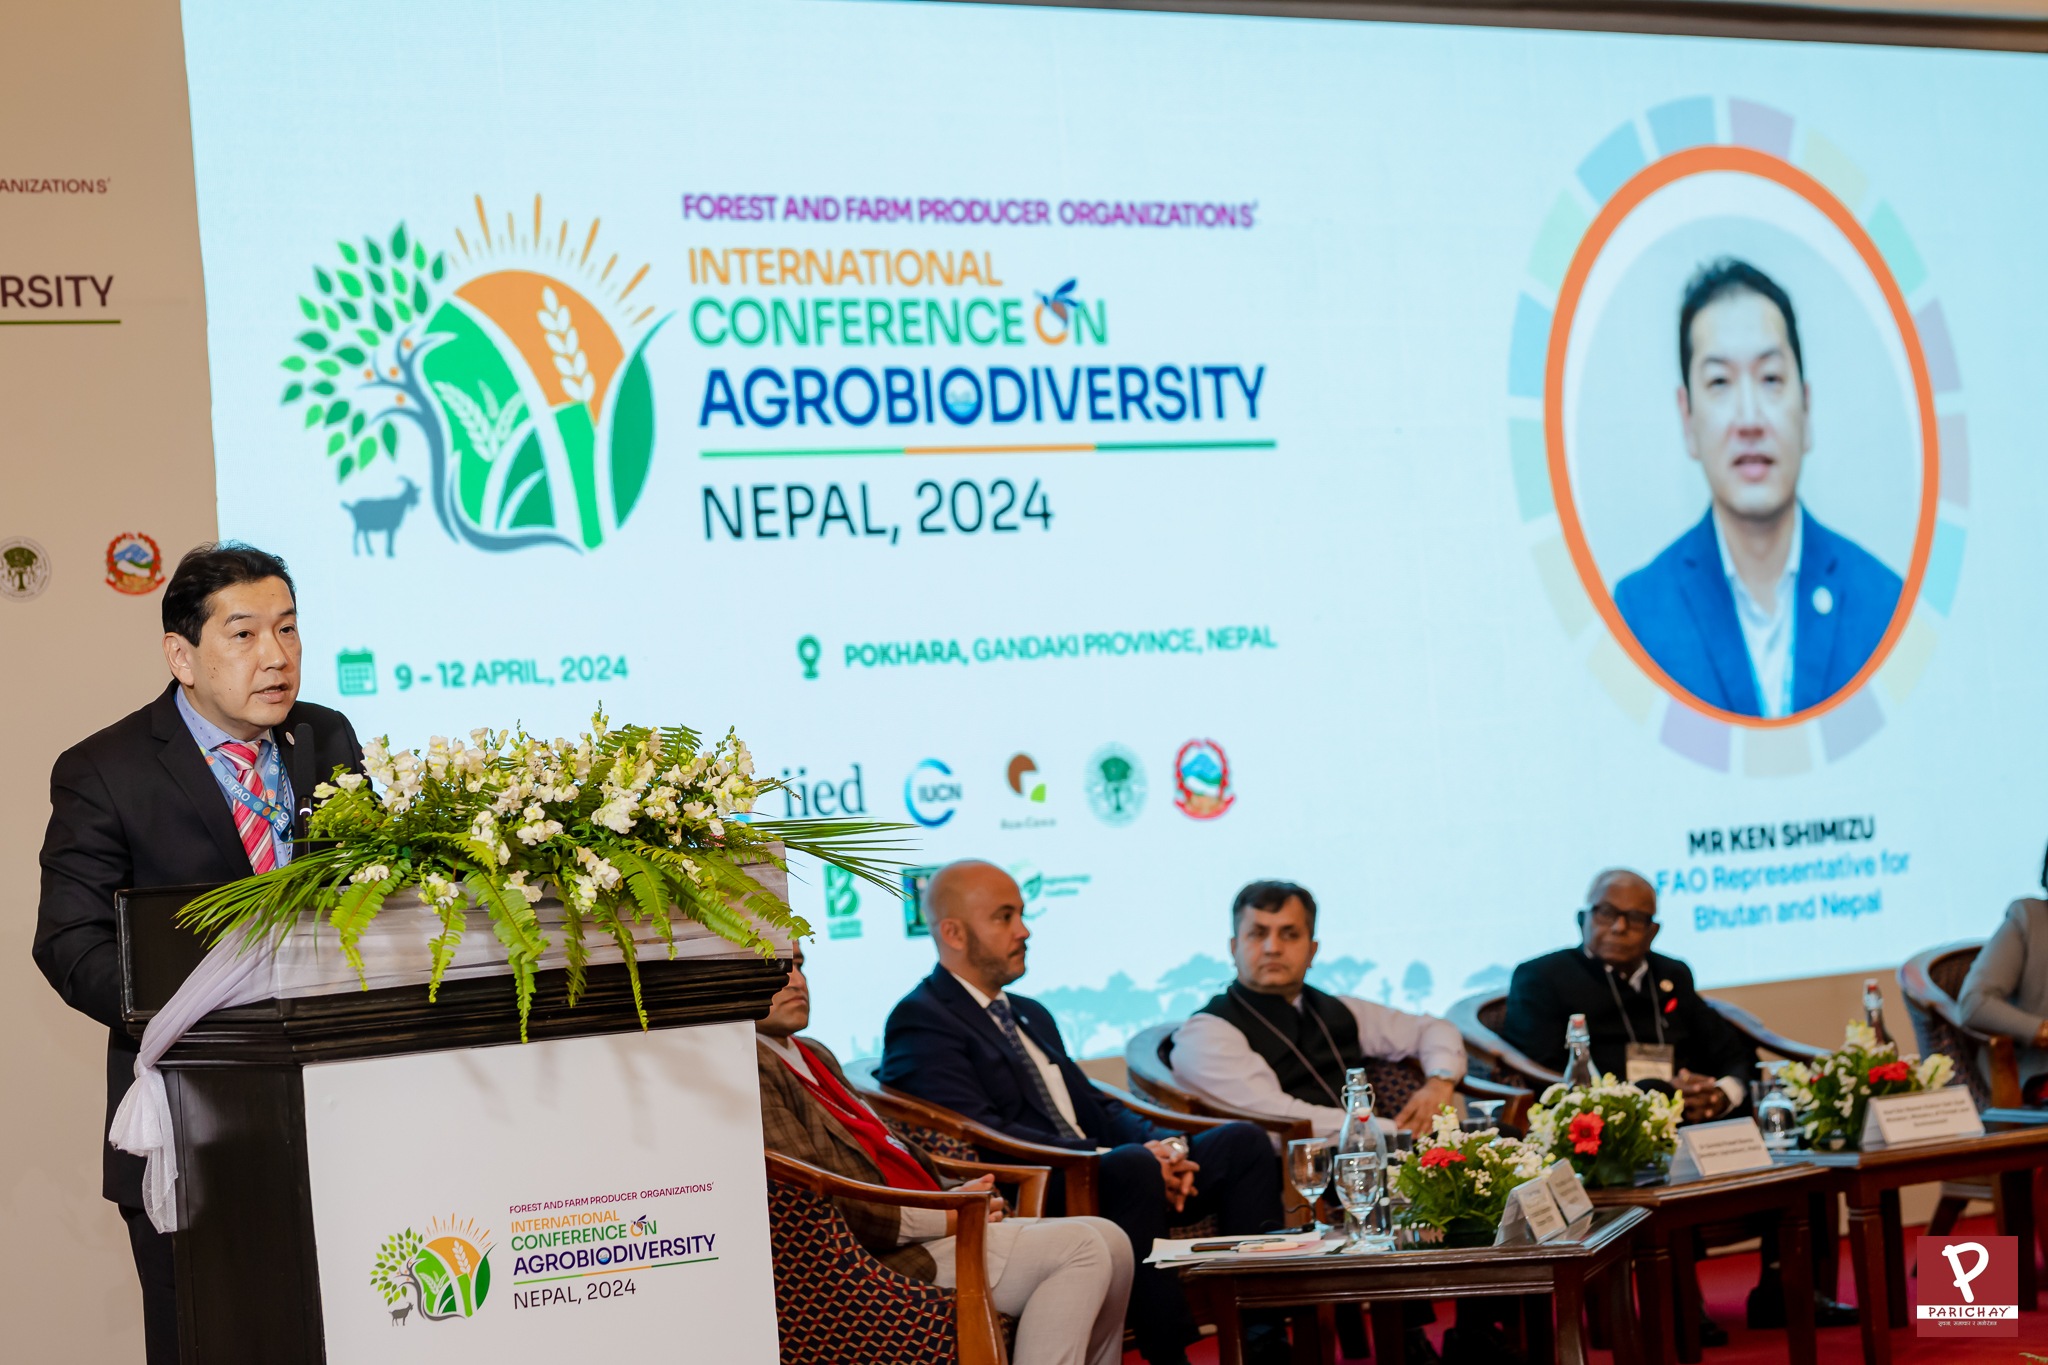 Int’l Conference on Agrobiodiversity 2024 kicks off in Pokhara